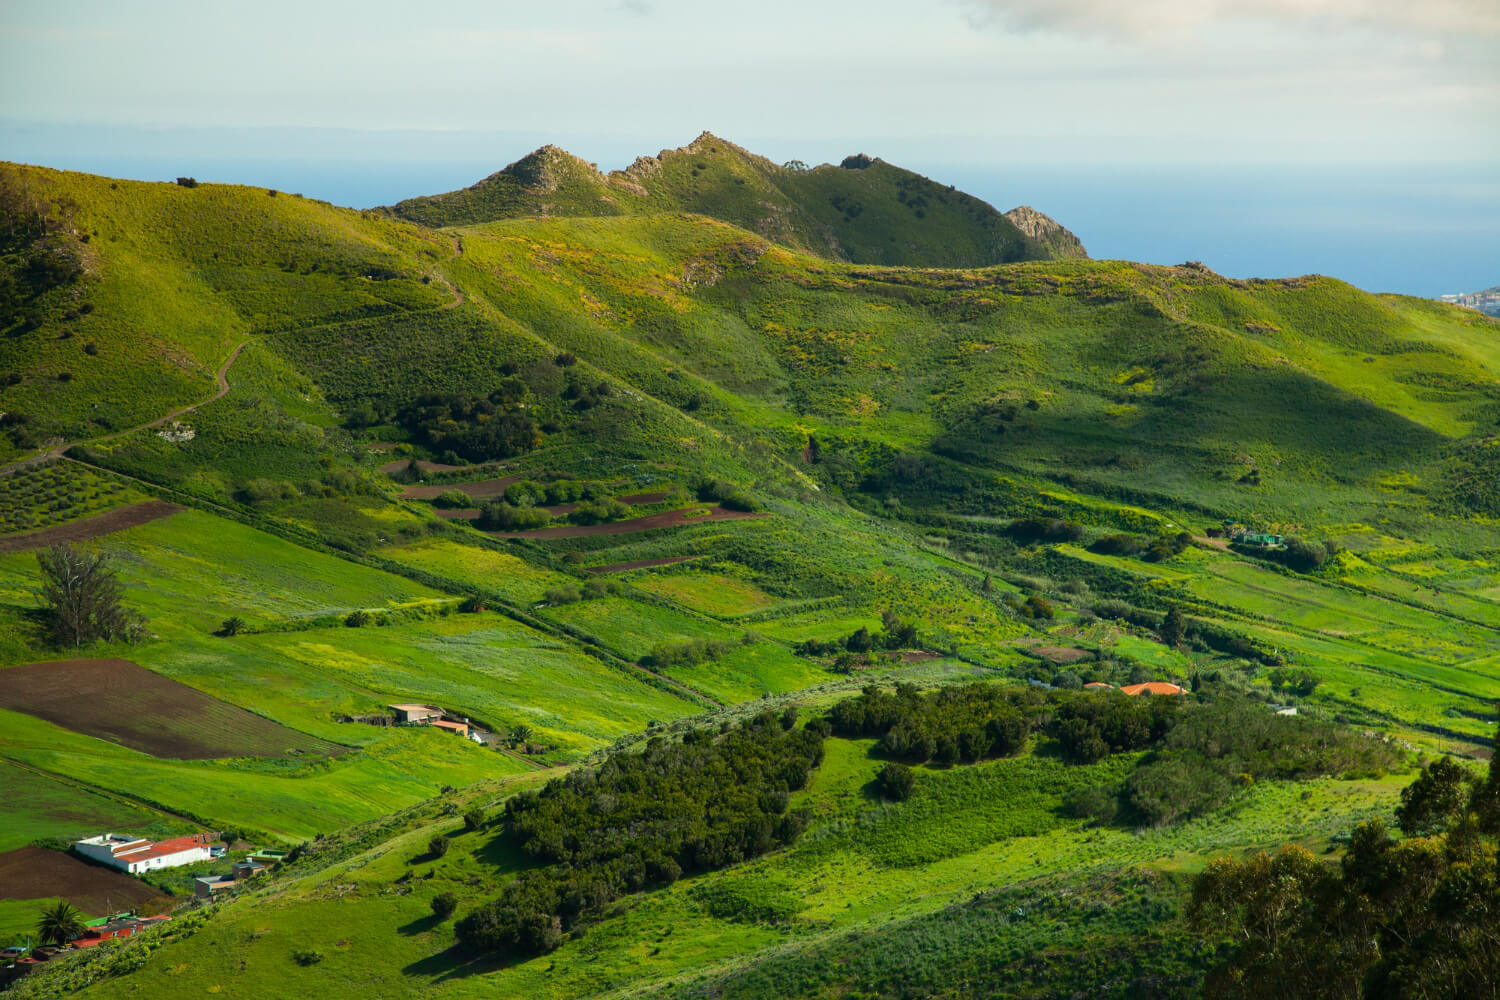 The best Canary Island: which one to choose and which is the greenest?